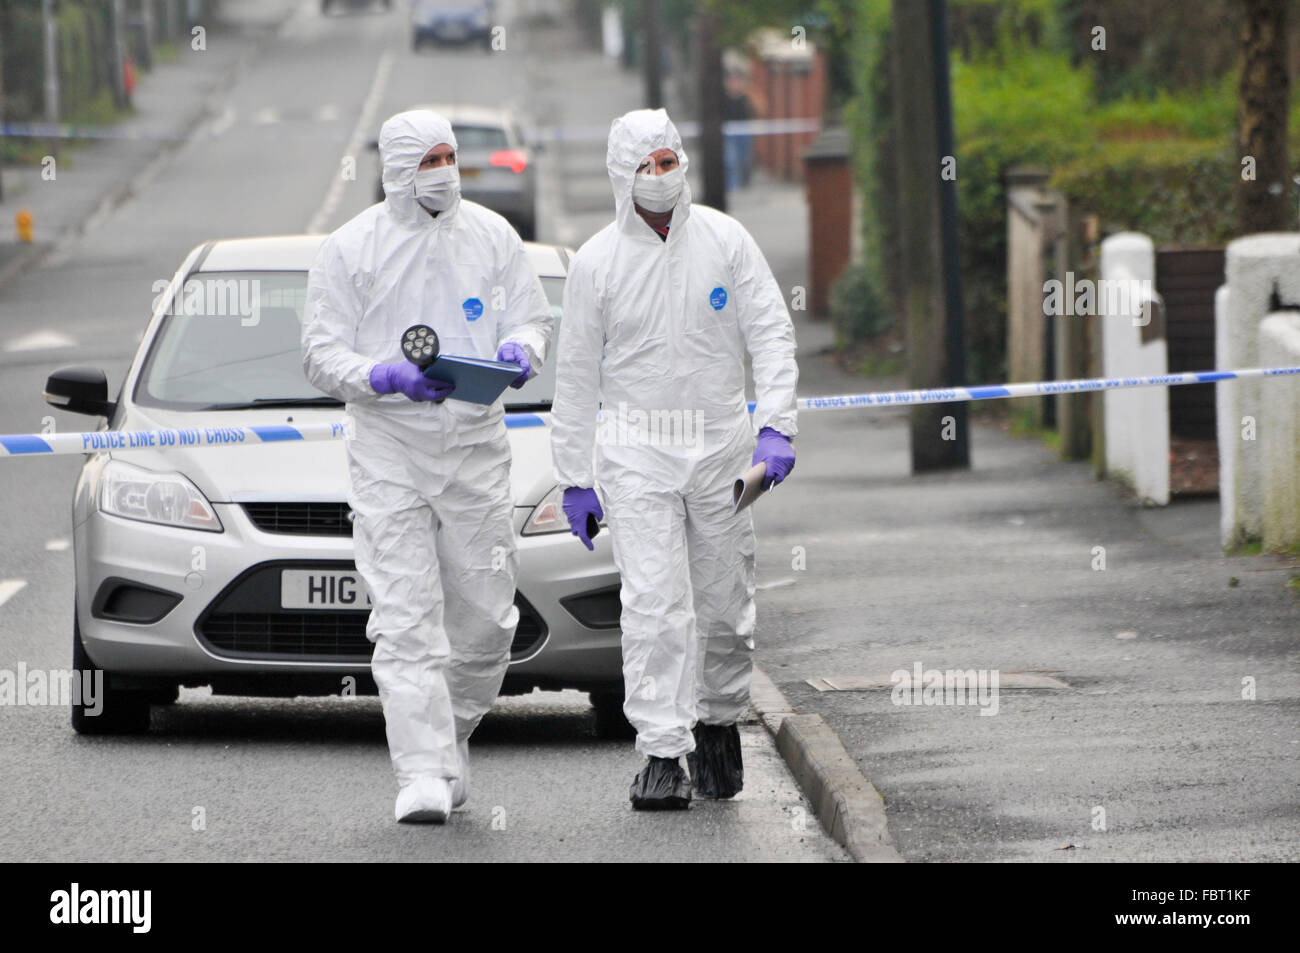 Greenisland, Northern Ireland. 19 Jan 2016 - Two detectives (DCI John McVea on the right) dressed in protective forensic clothing walk up to a murder scene to investigate Credit:  Stephen Barnes/Alamy Live News Stock Photo